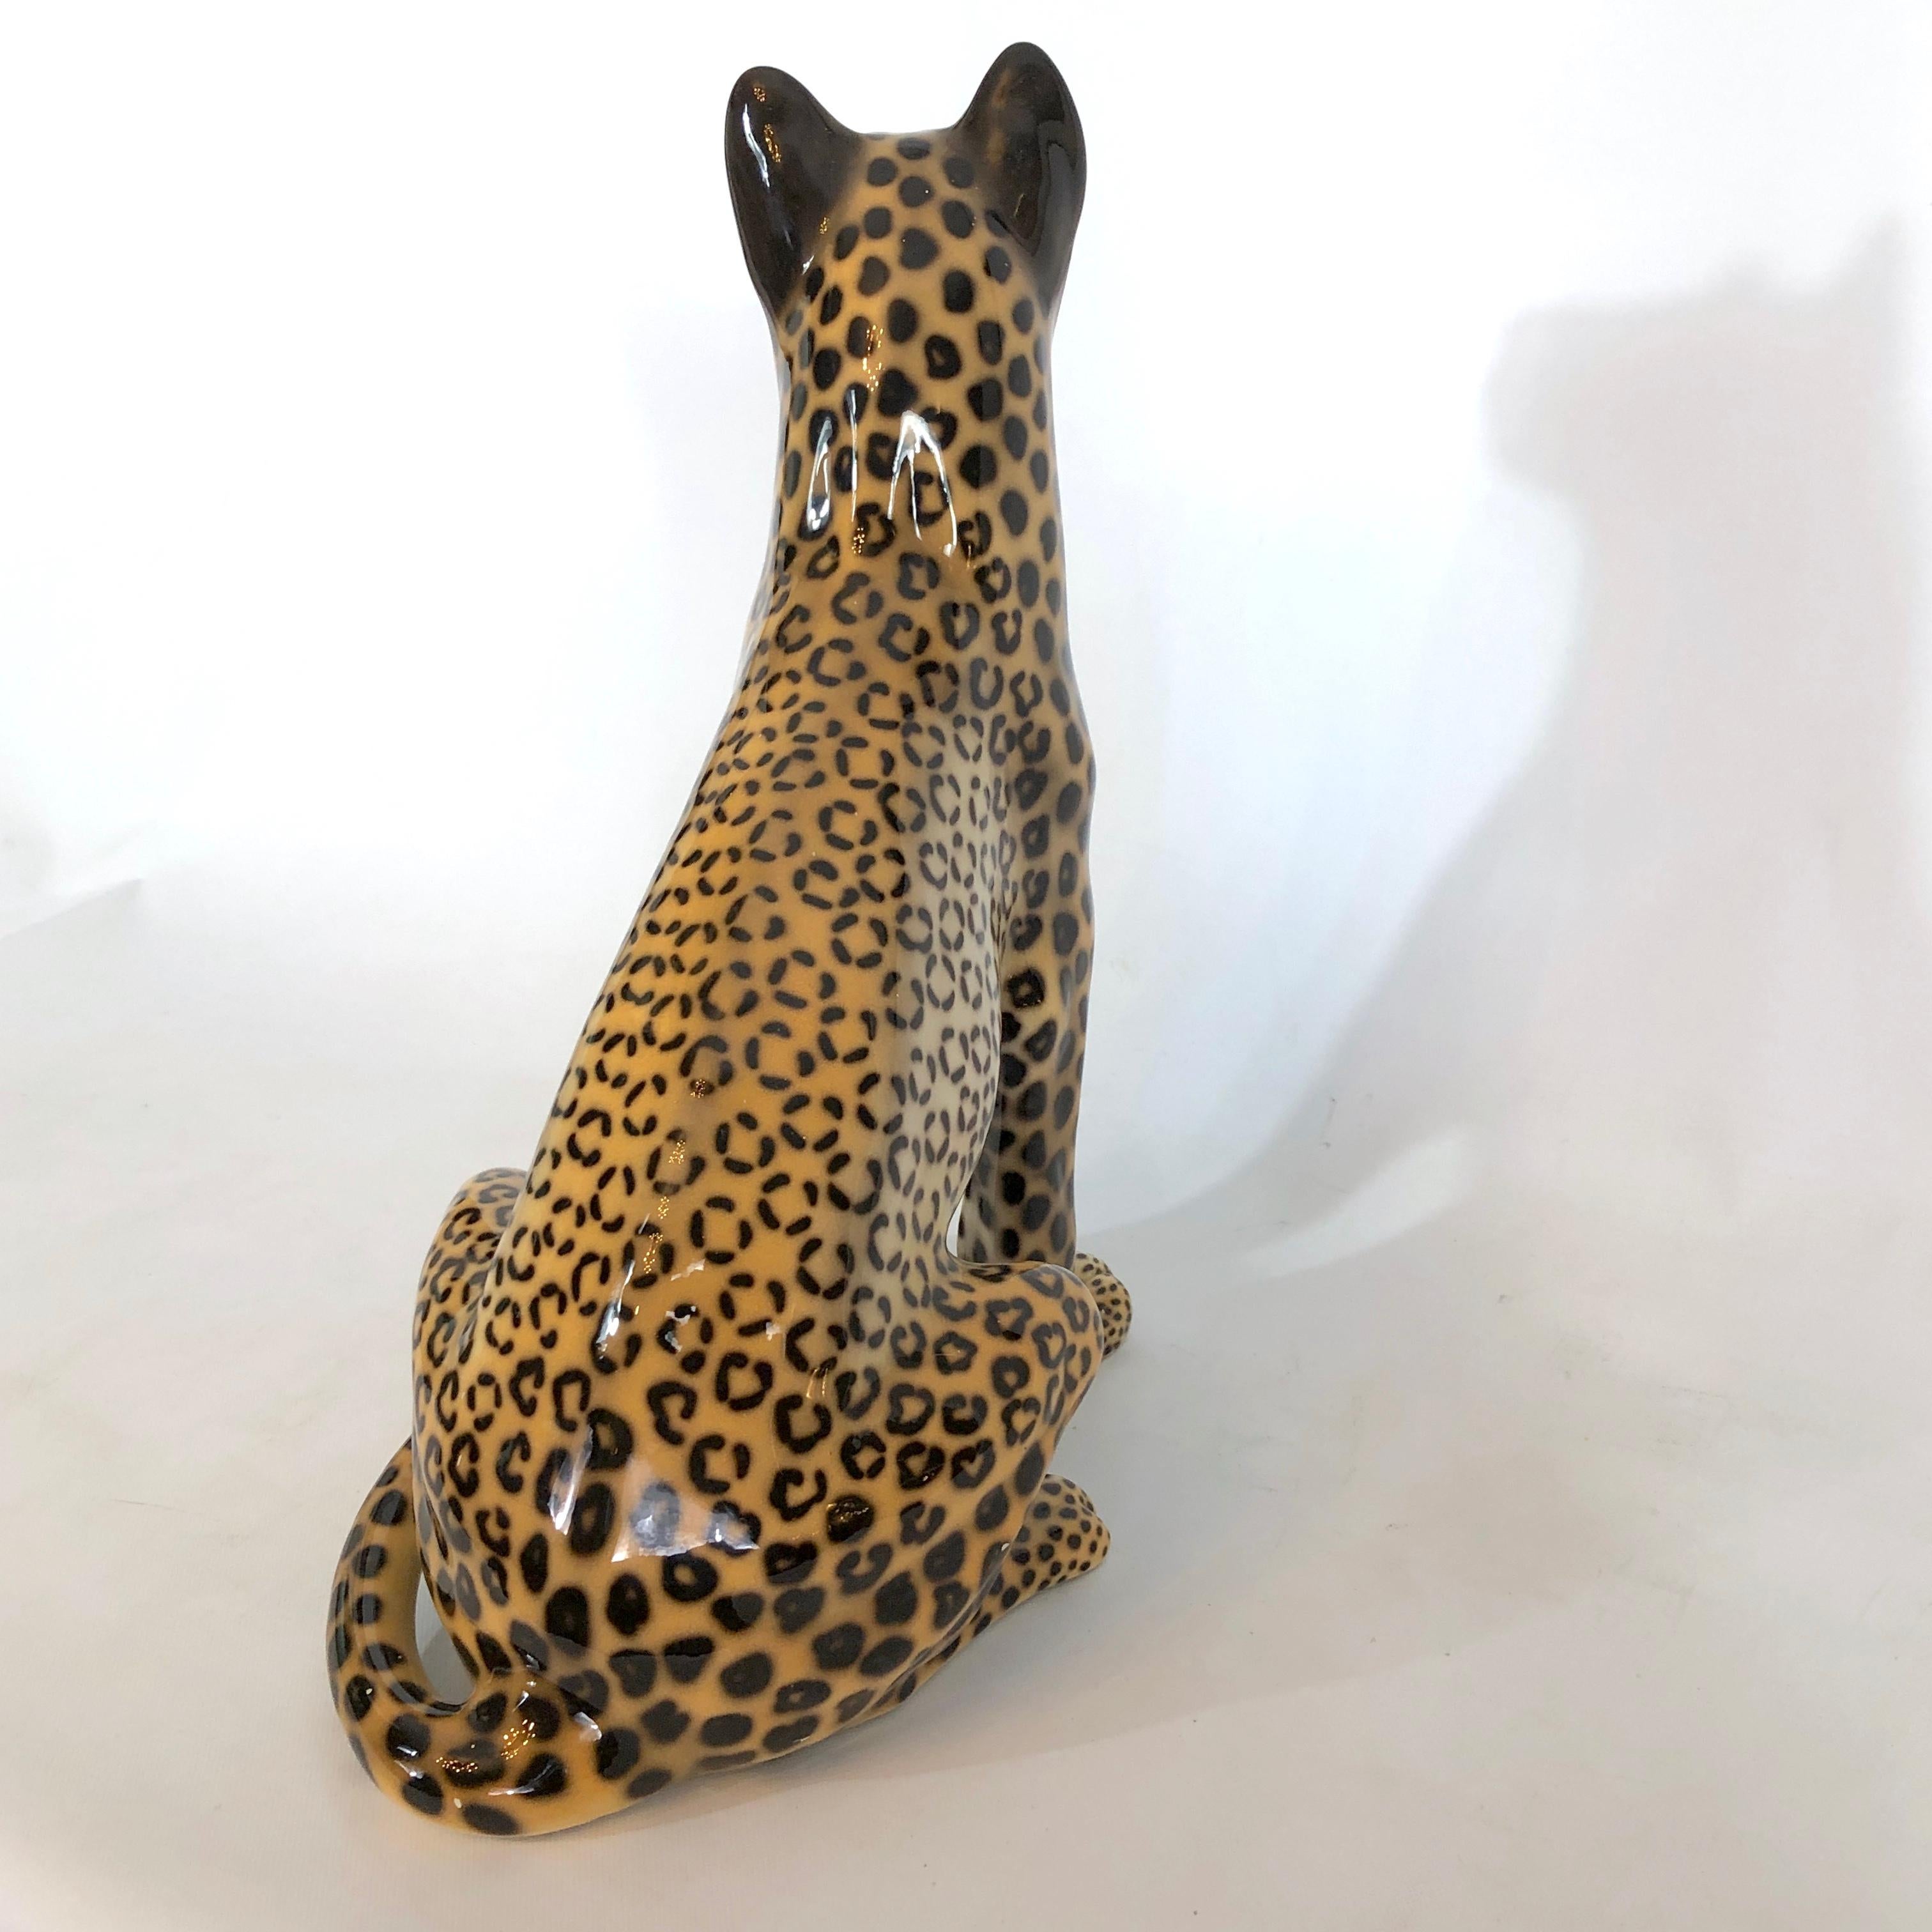 Large Vintage Italian ceramic Leopard from 60s. Signed 1